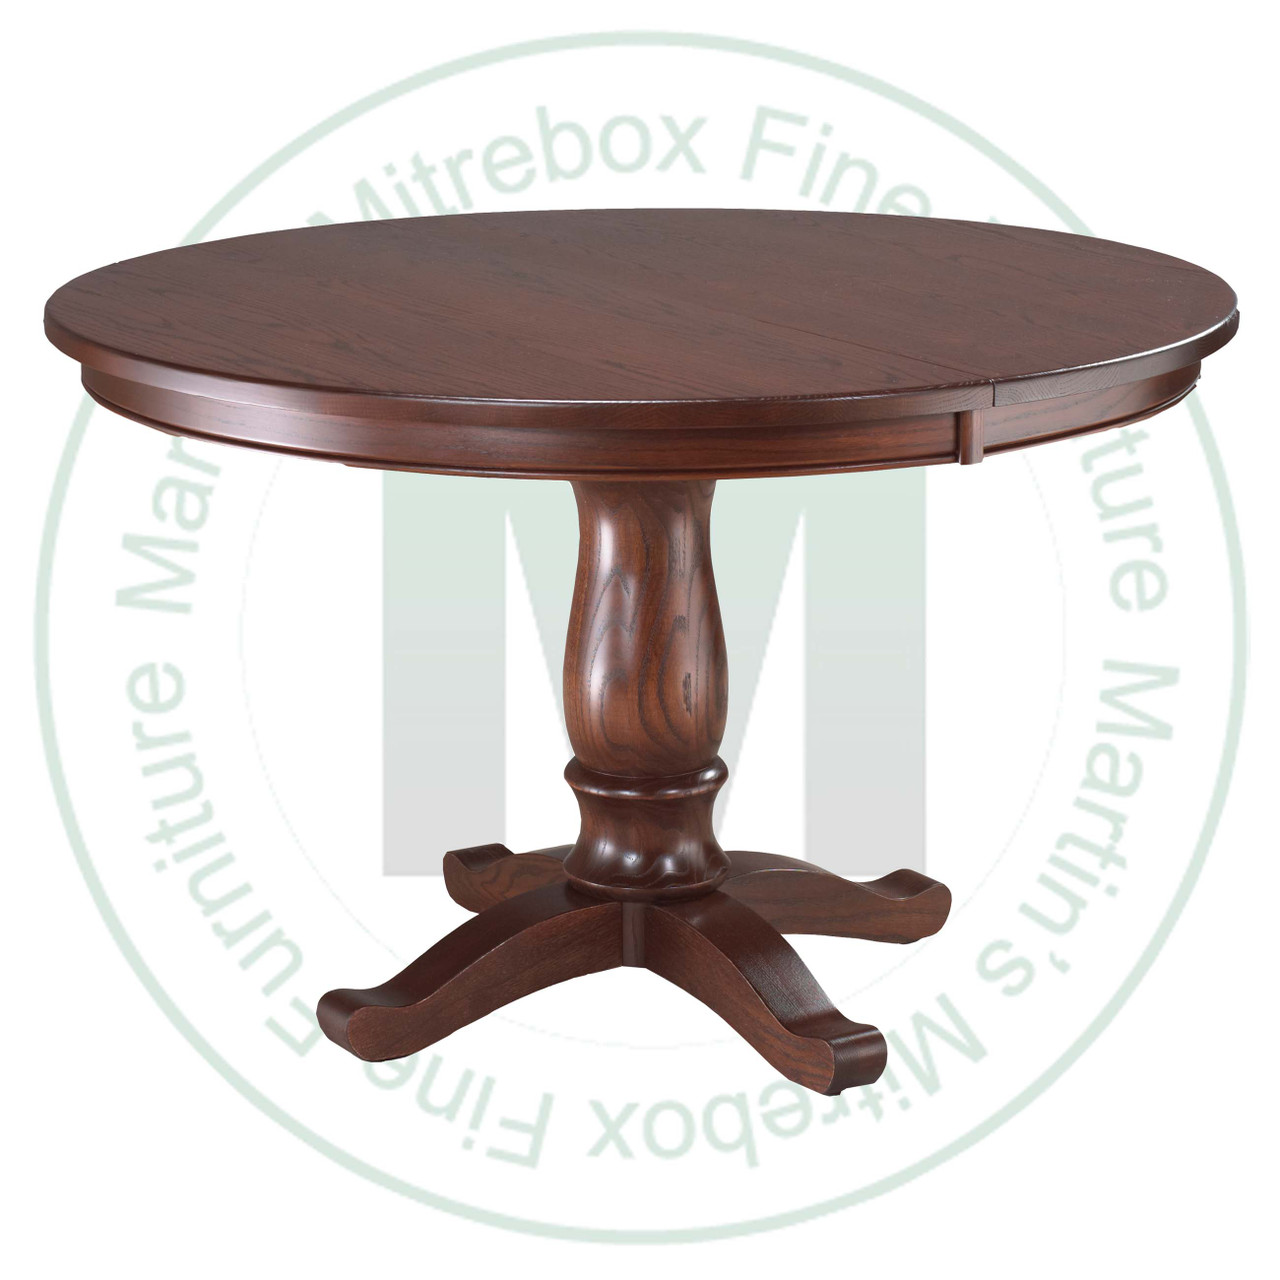 Maple Kimberly Crest Single Pedestal Table 36''D x 36''W x 30''H With 2 - 12'' Leaves Table. Table Has 1'' Thick Top.